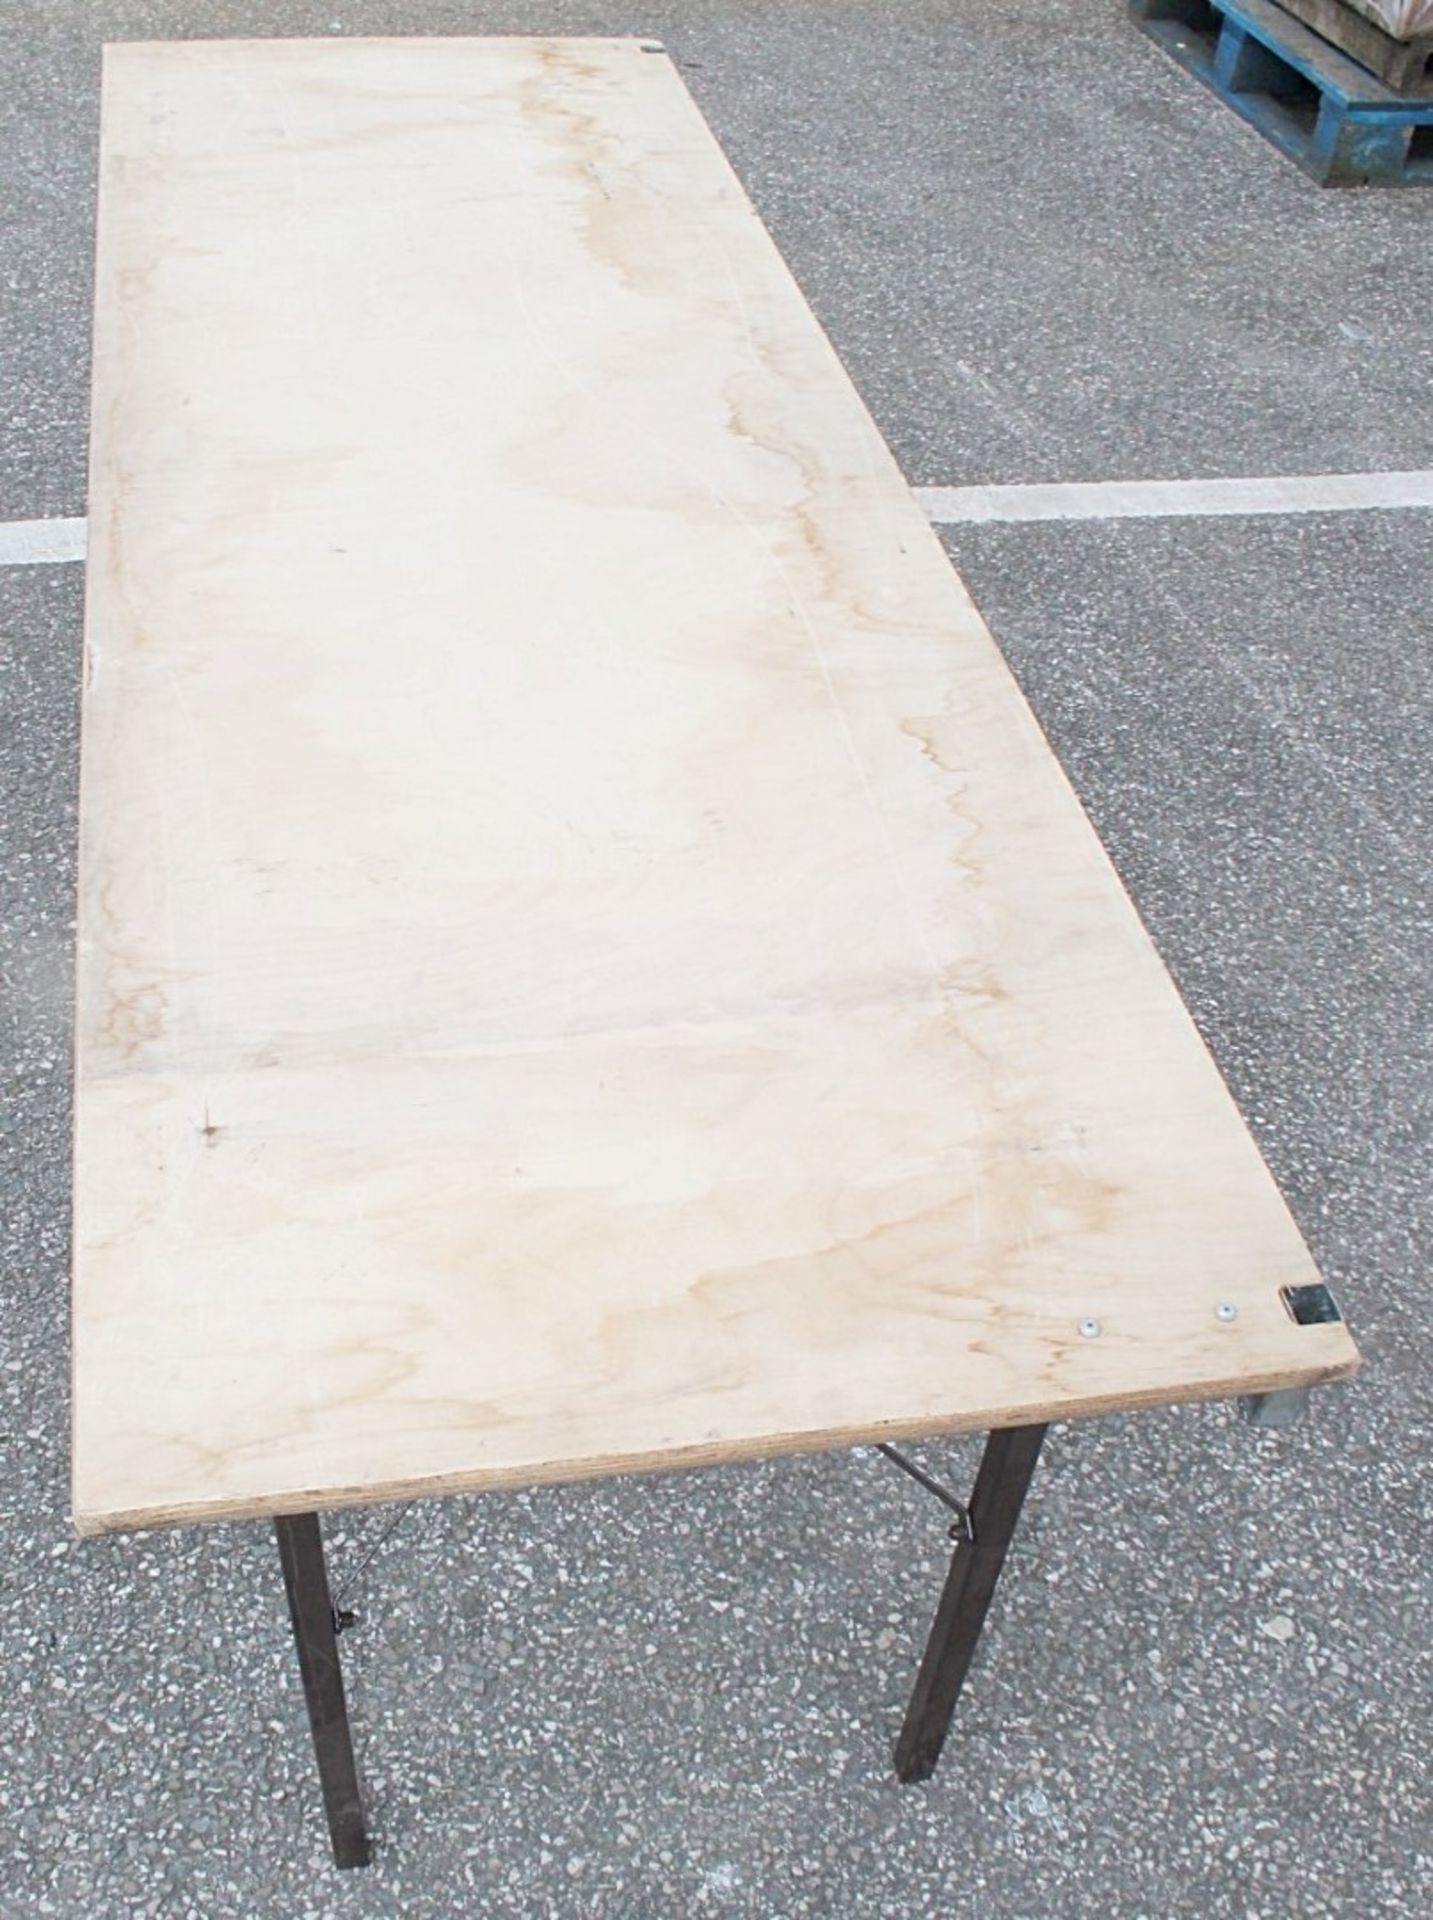 1 x Folding 6ft Wooden Topped Rectangular Trestle Table - Recently Removed From A Well-known - Image 3 of 6